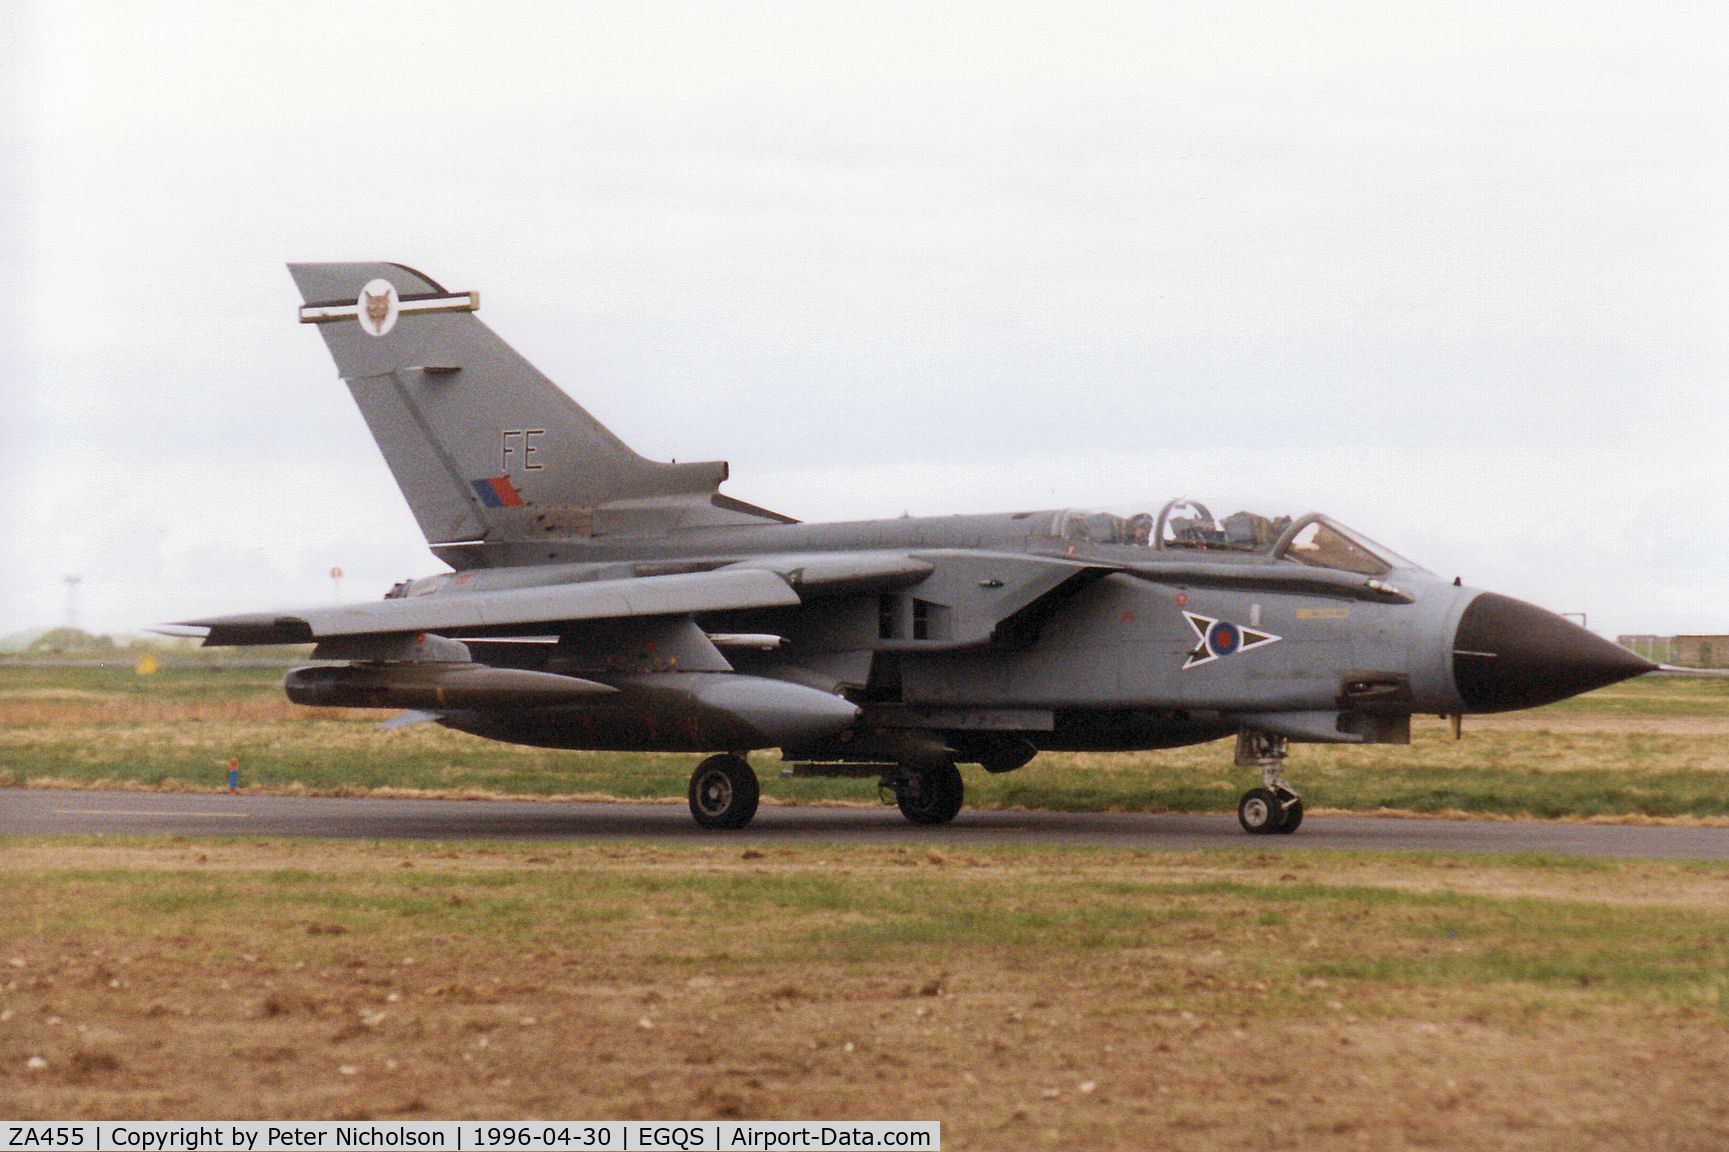 ZA455, 1983 Panavia Tornado GR.1B C/N BS085/254/3121, Tornado GR.1B, callsign Jackal 3, of 12 Squadron taxying to the active runway at RAF Lossiemouth in April 1996.